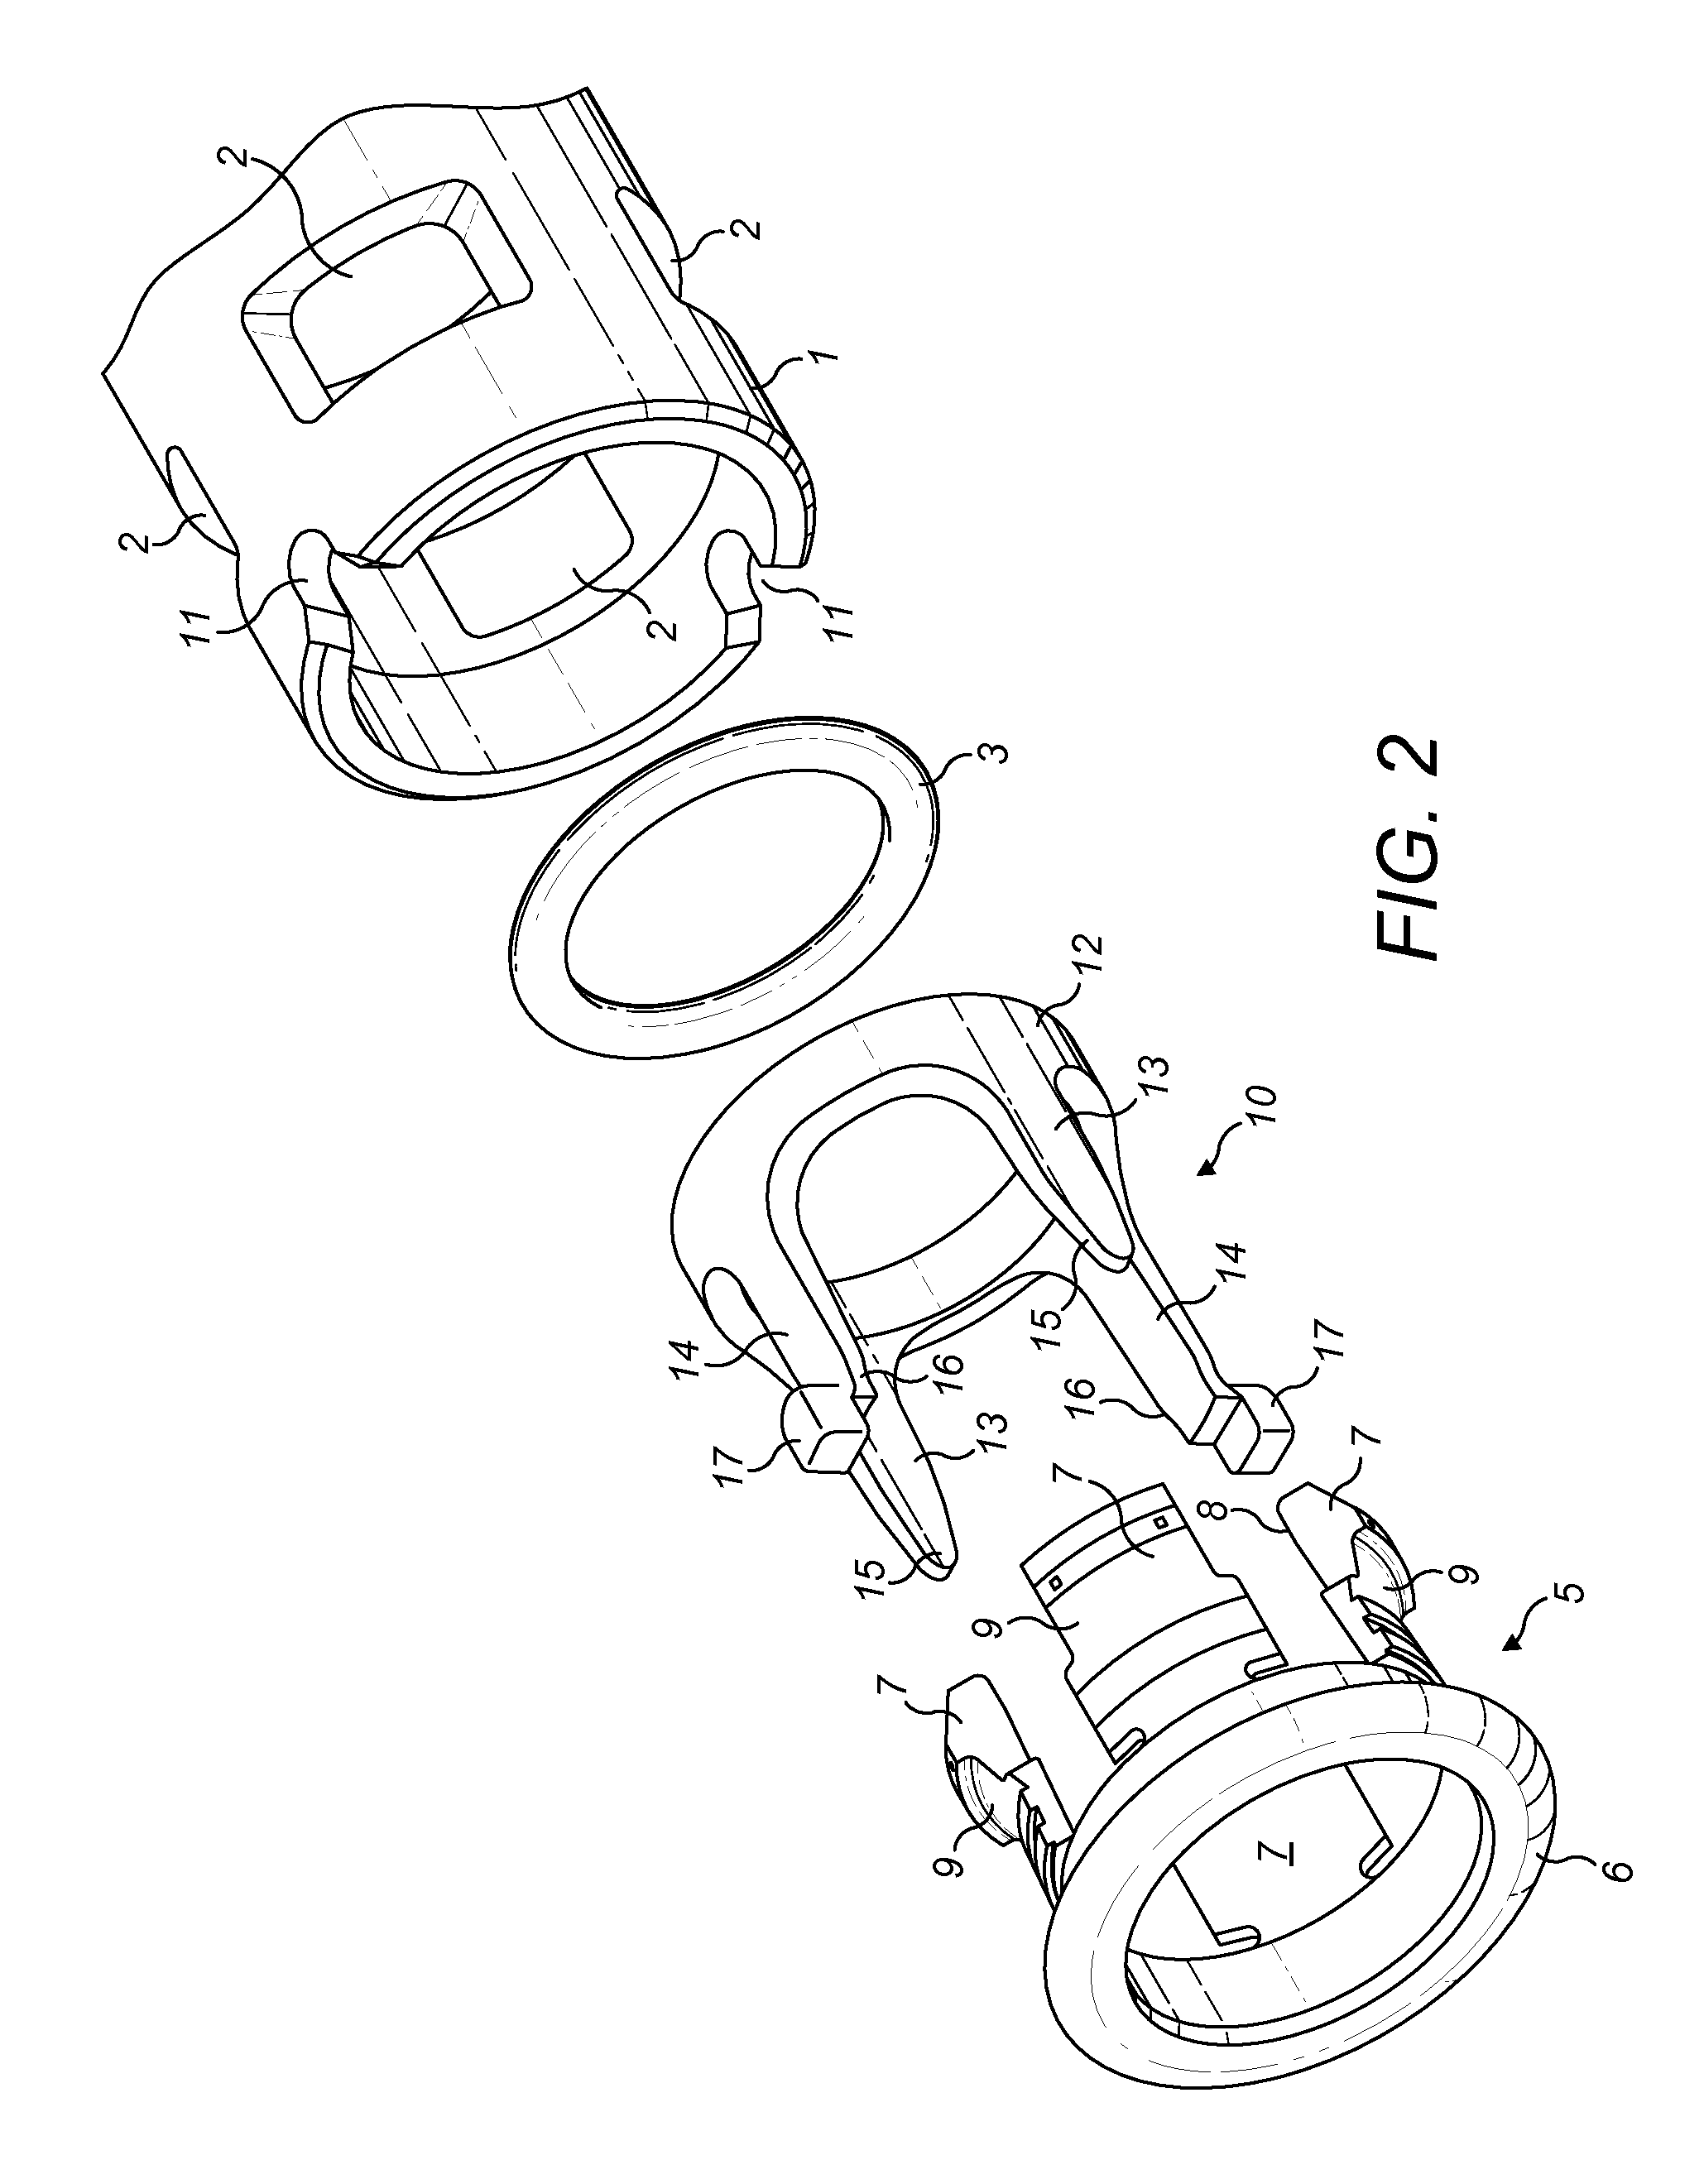 Tube coupling having an improved collet alignment